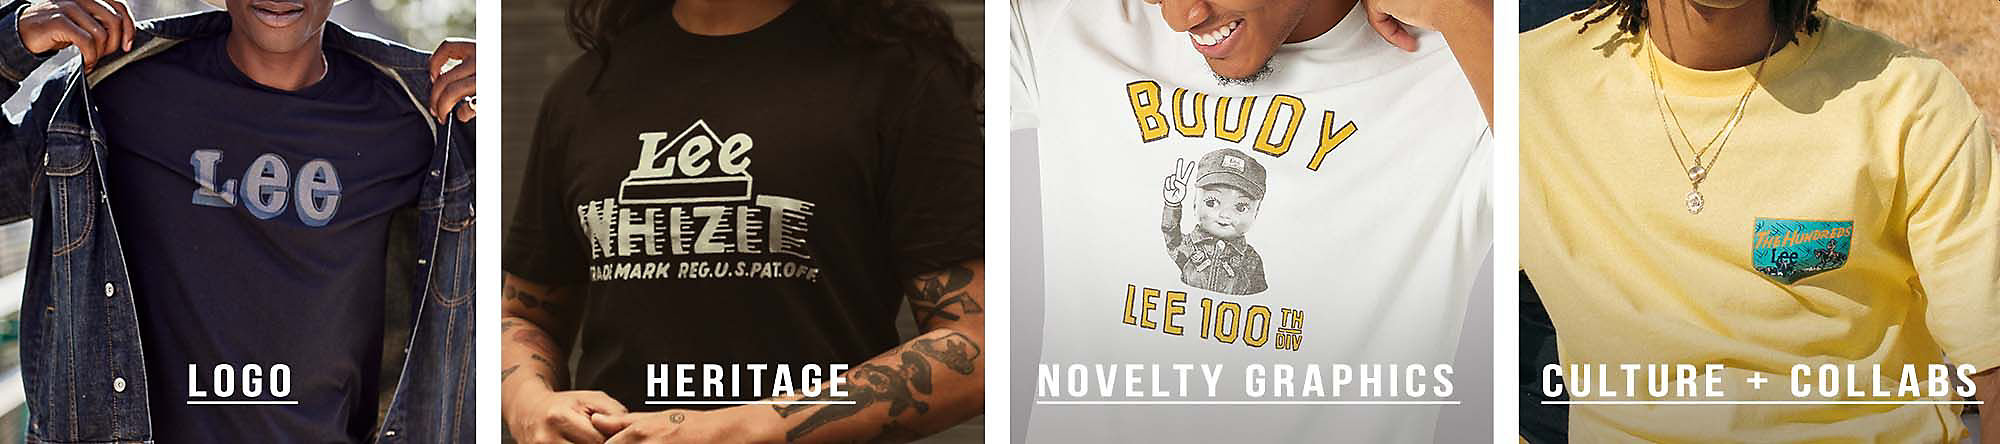 Lee tee shirts by type